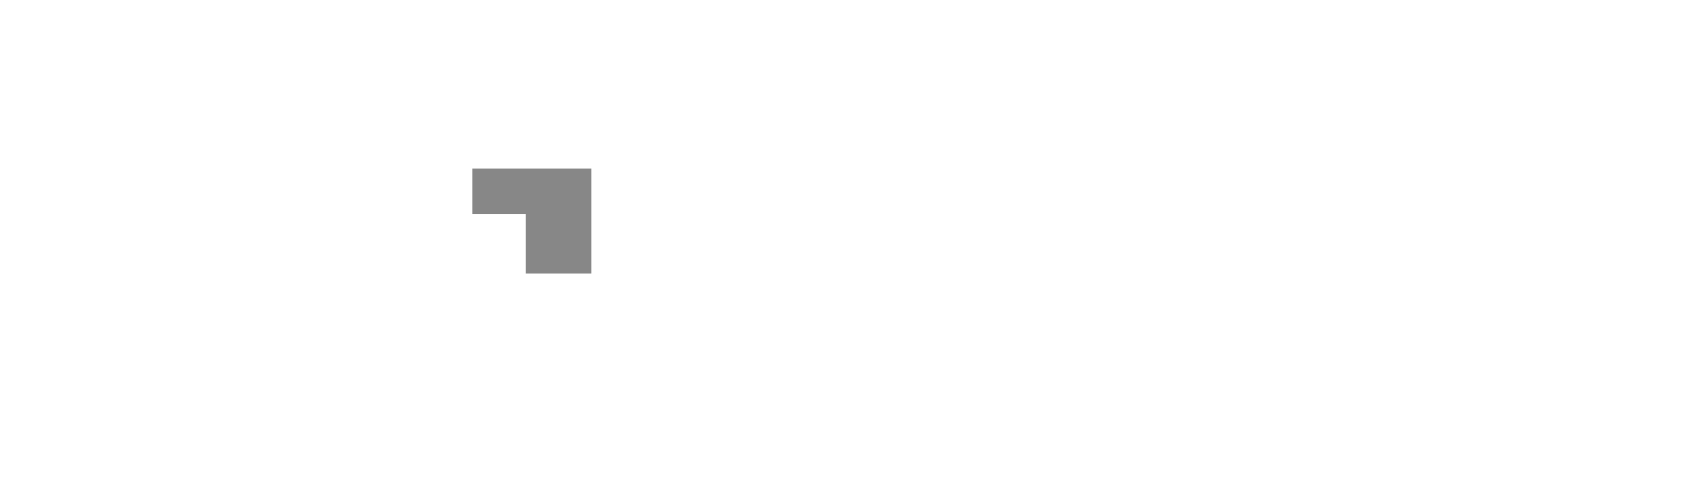 LINET Services GmbH